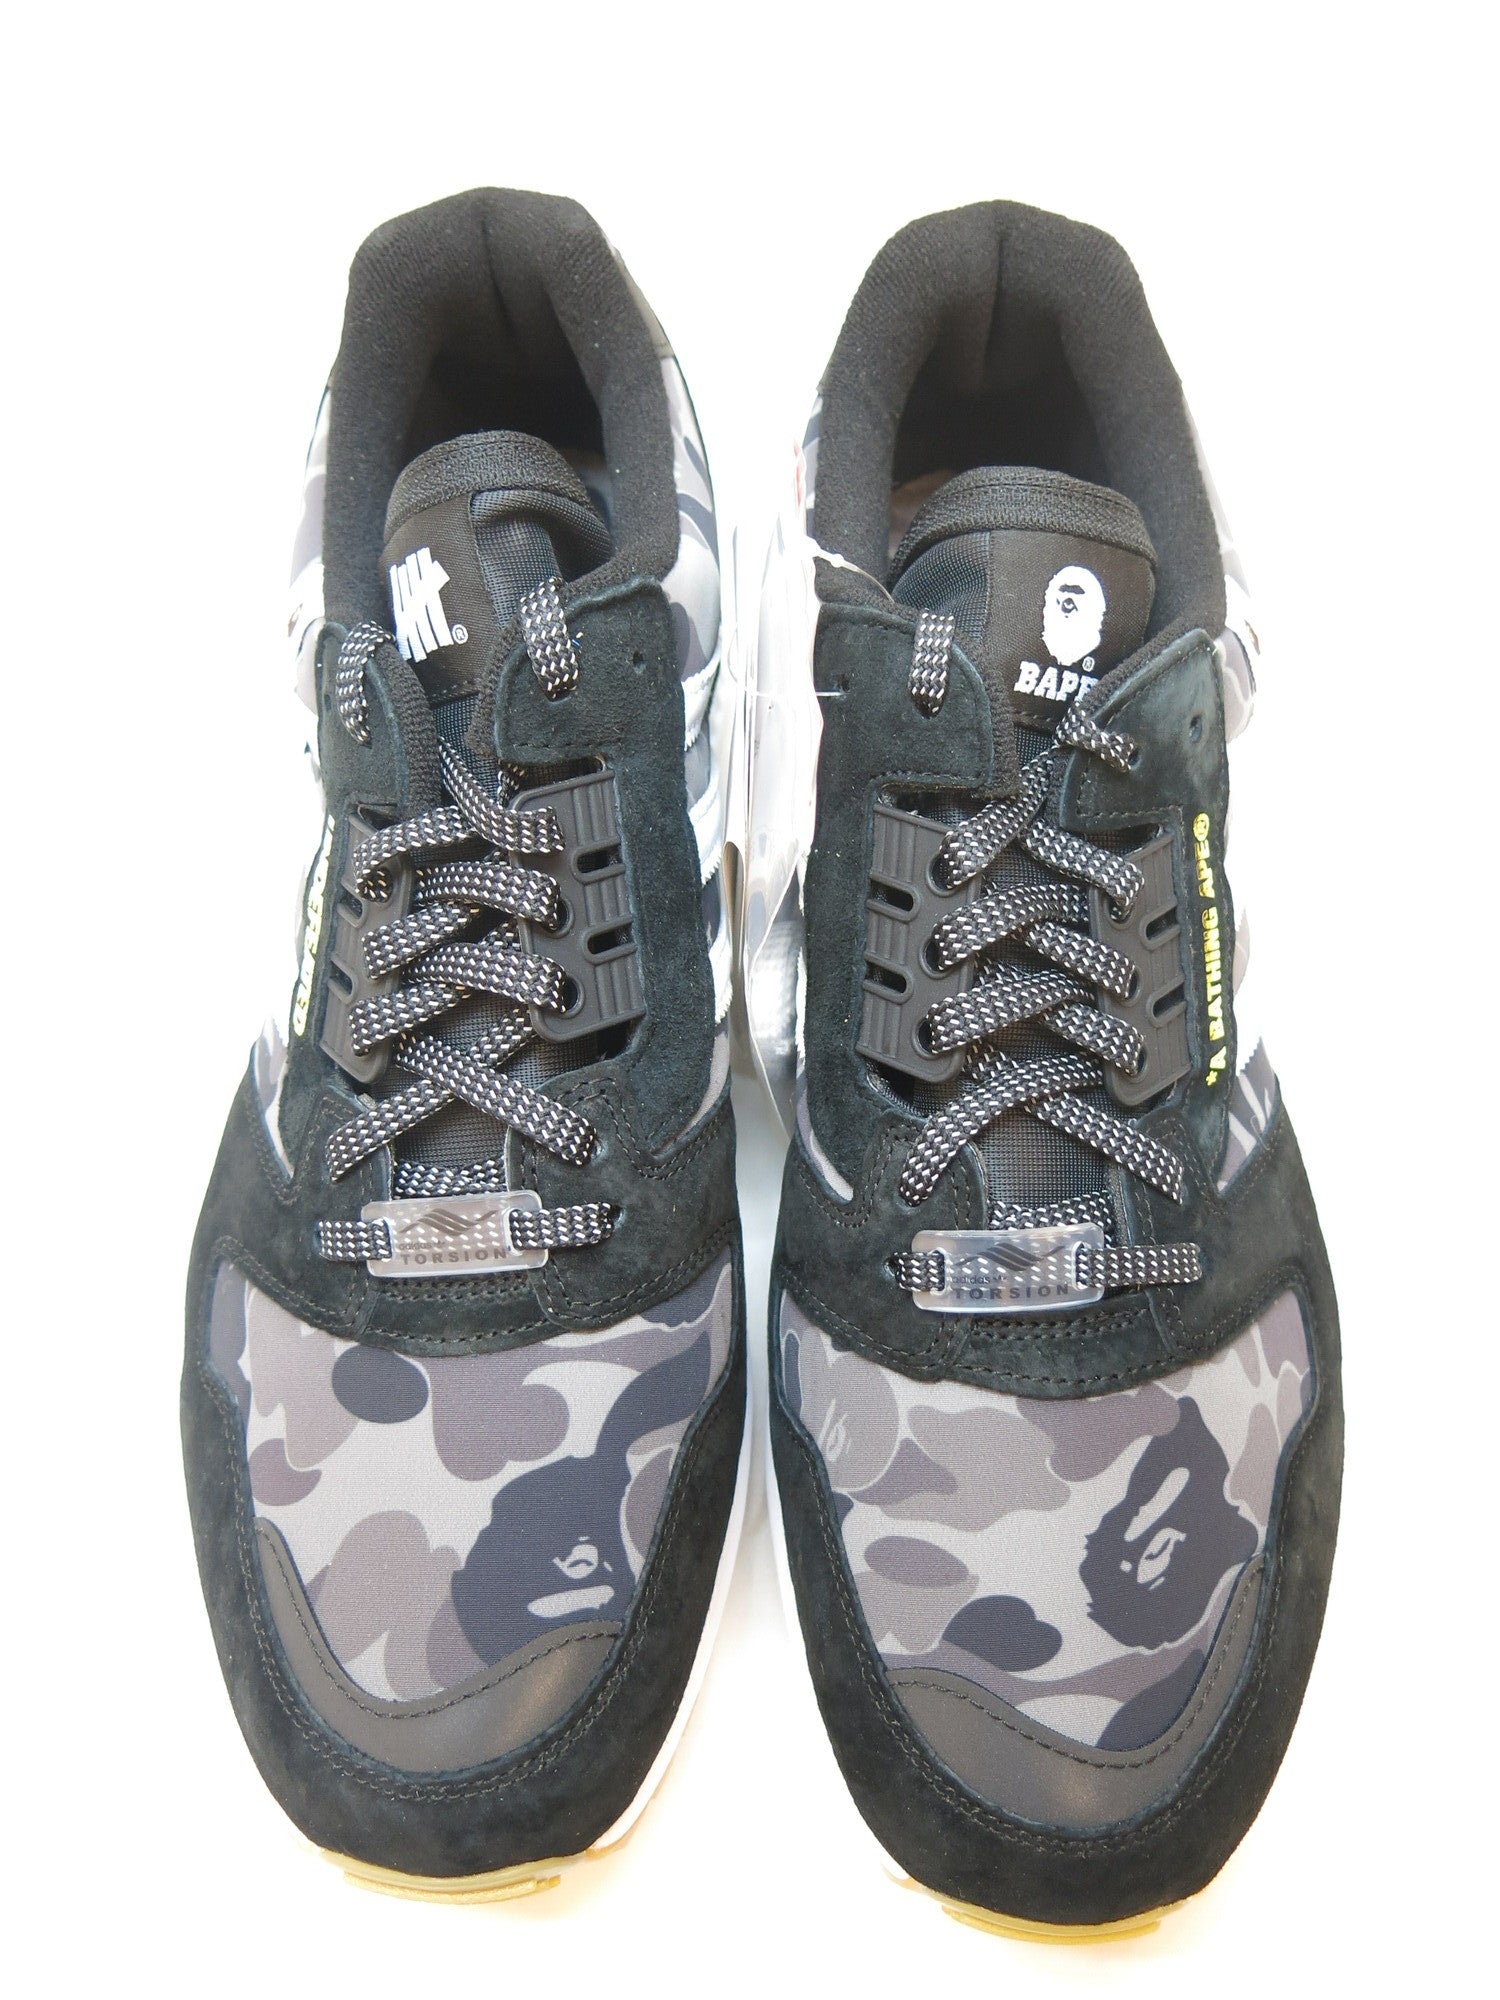 BAPE/A BATHING APE/UNDEFEATED/adidas/ZX 8000/ベイプ/アベイシング